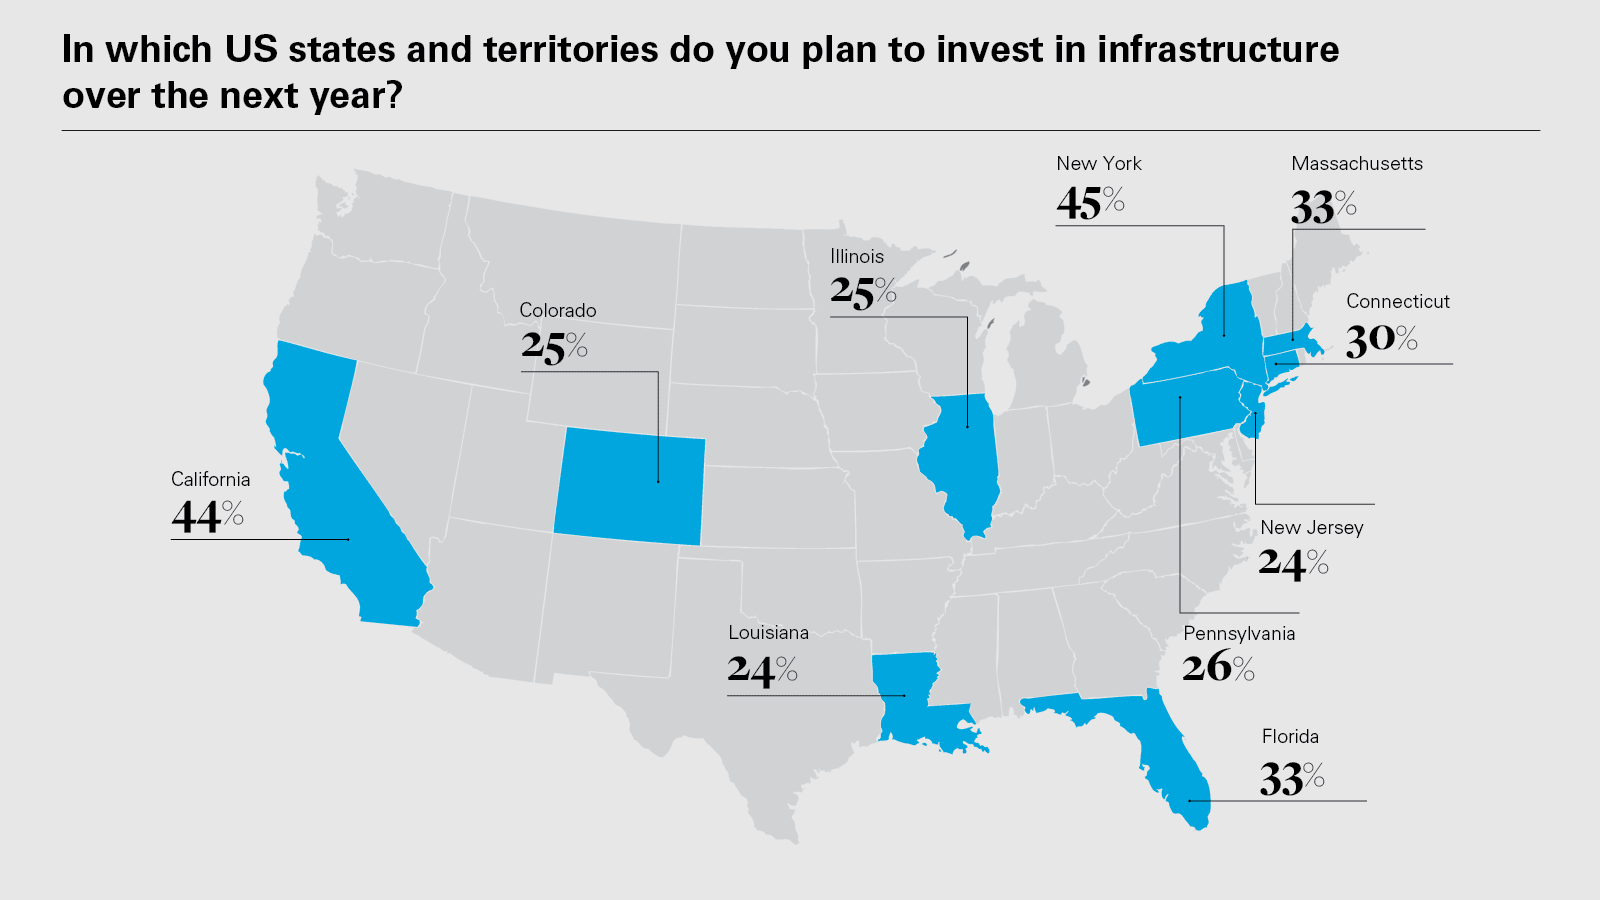 In which US states and territories do you plan to invest in infrastructure over the next year?